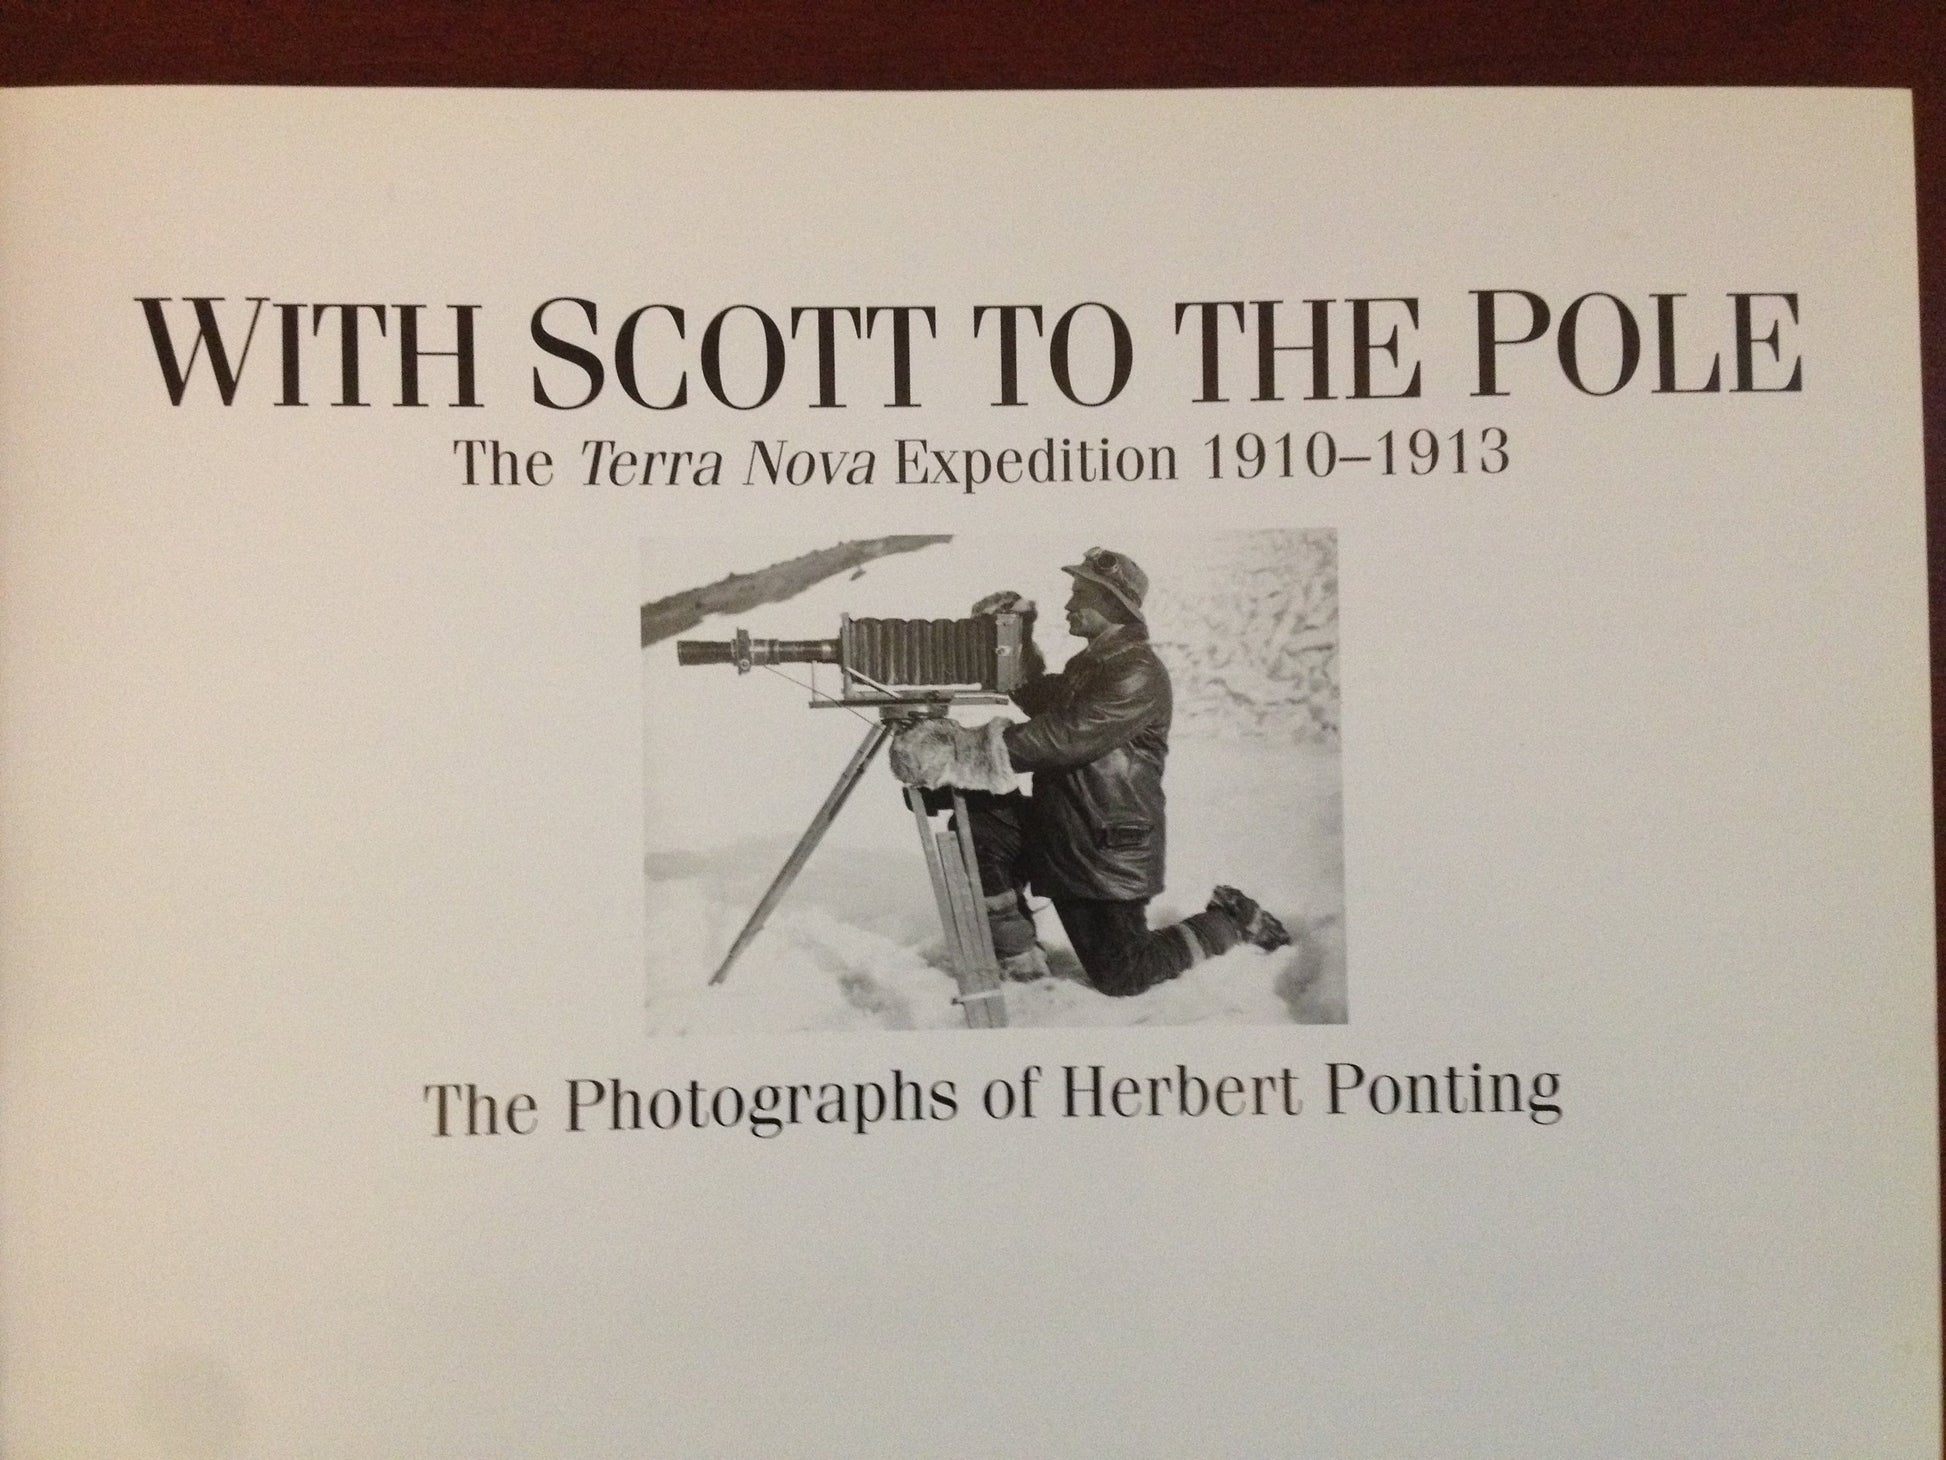 WITH SCOTT TO THE POLICE THE TERRA NOVA EXPEDITION 1910-1913, THE PHOTOGRAPHS OF HERBERT PONTING BooksCardsNBikes